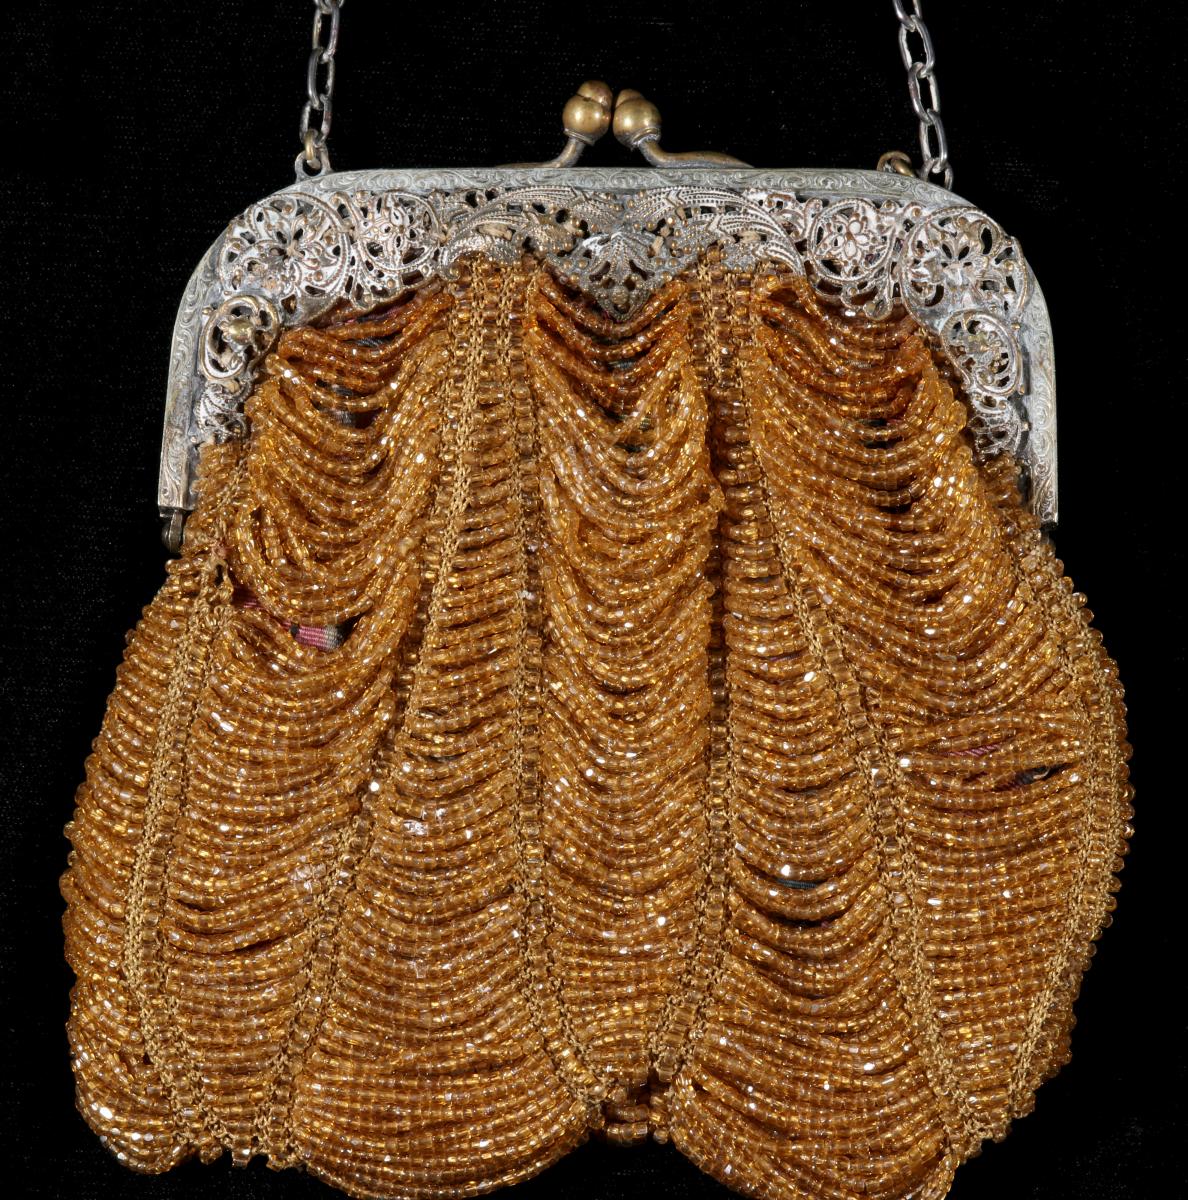 A VICTORIAN BEADED PURSE WITH FILIGREE FRAME